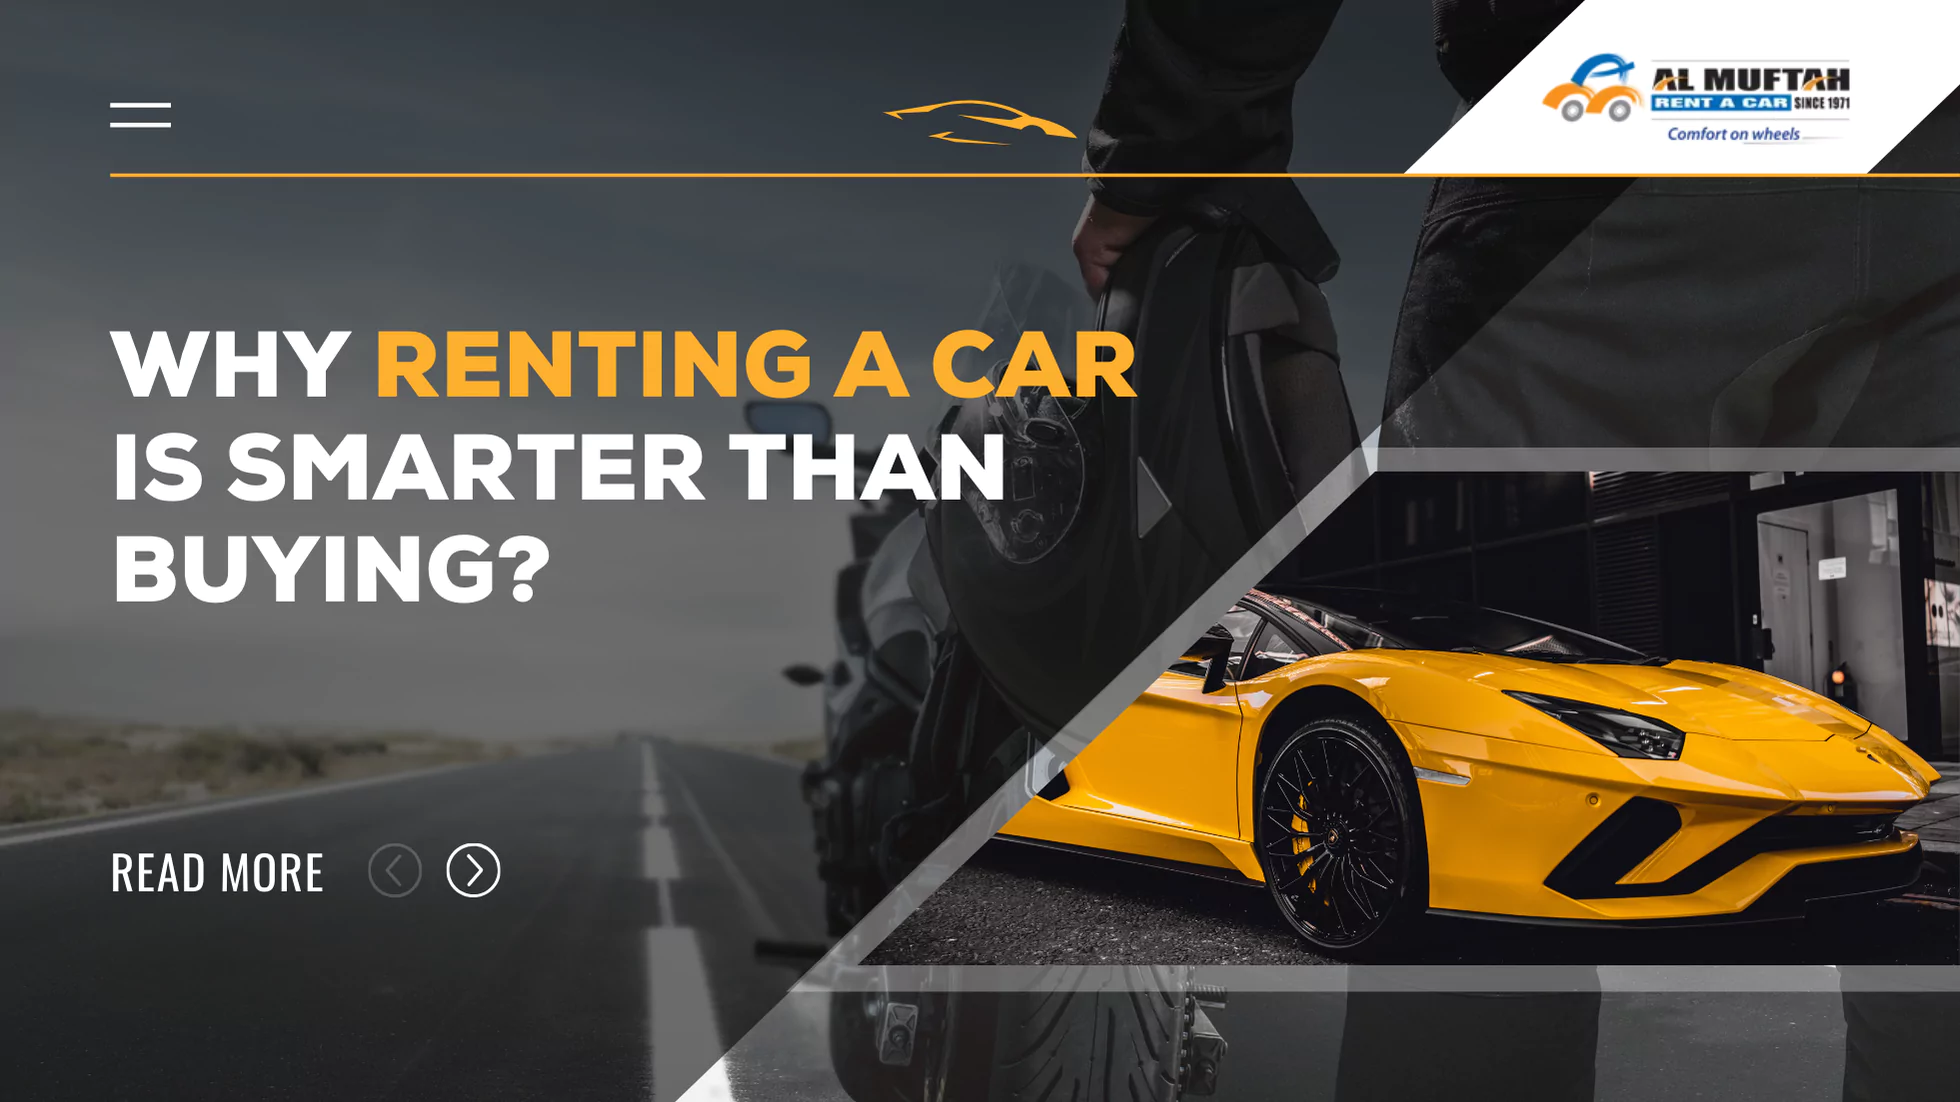 Why Renting a Car is Smarter Than Buying?